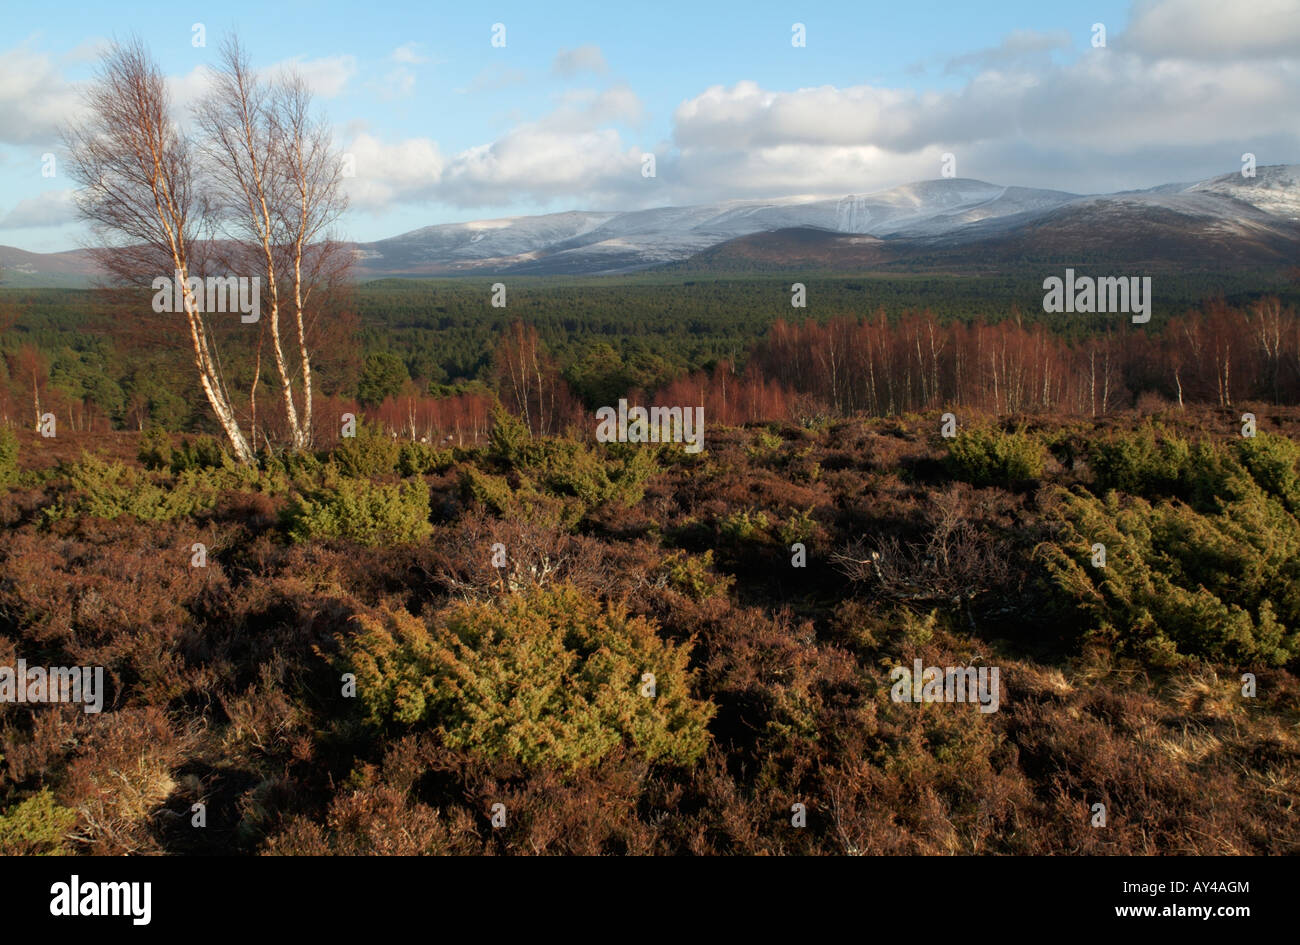 The Rothiemurchus Forest and Cairngorm Mountains from Whitewell near Inverdruie, Highland Stock Photo